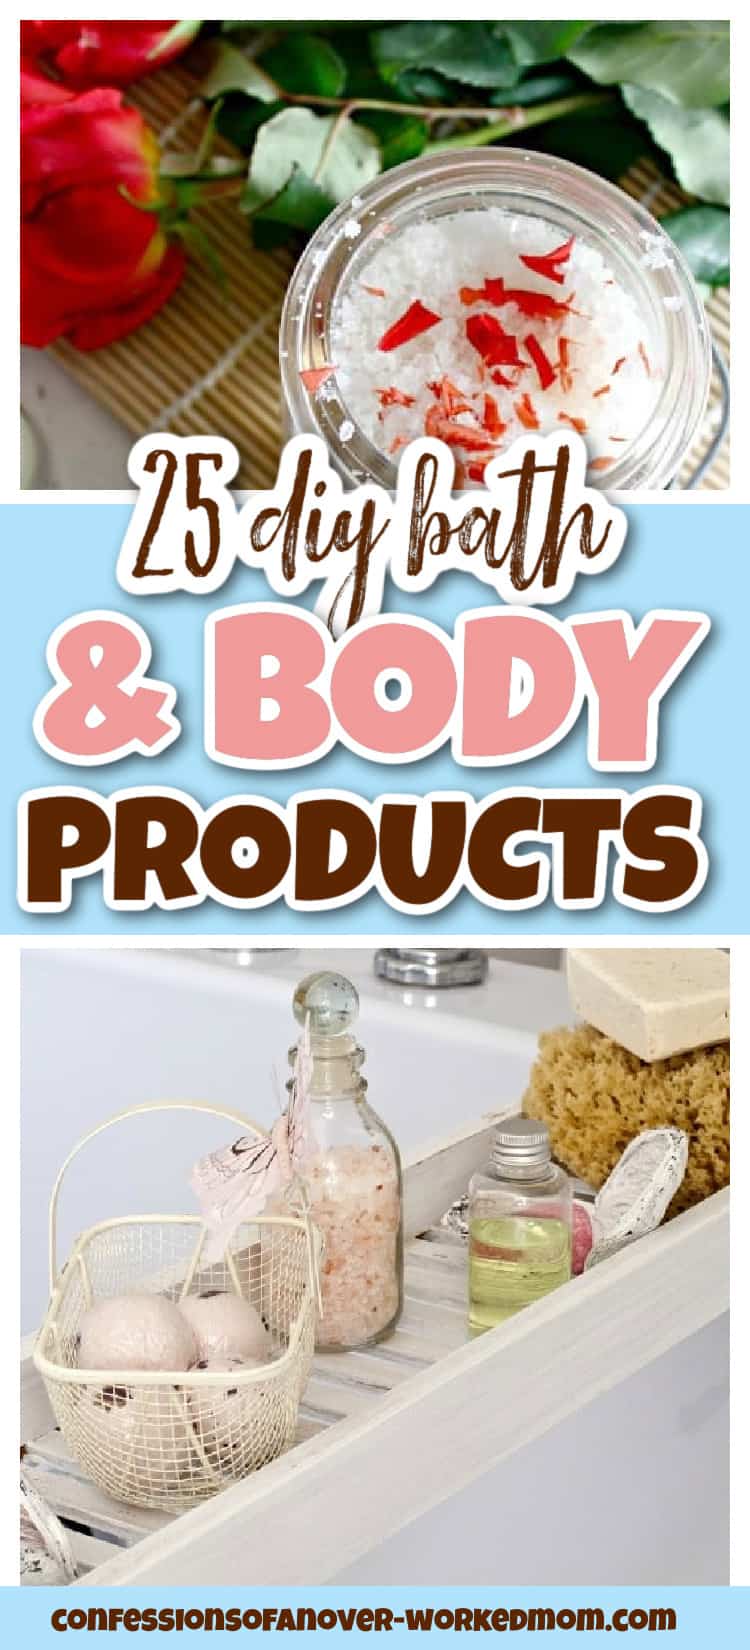 If the stress is getting to you, these DIY bath and body products will help you relax. Get the recipes for these homemade bath and body products right here.